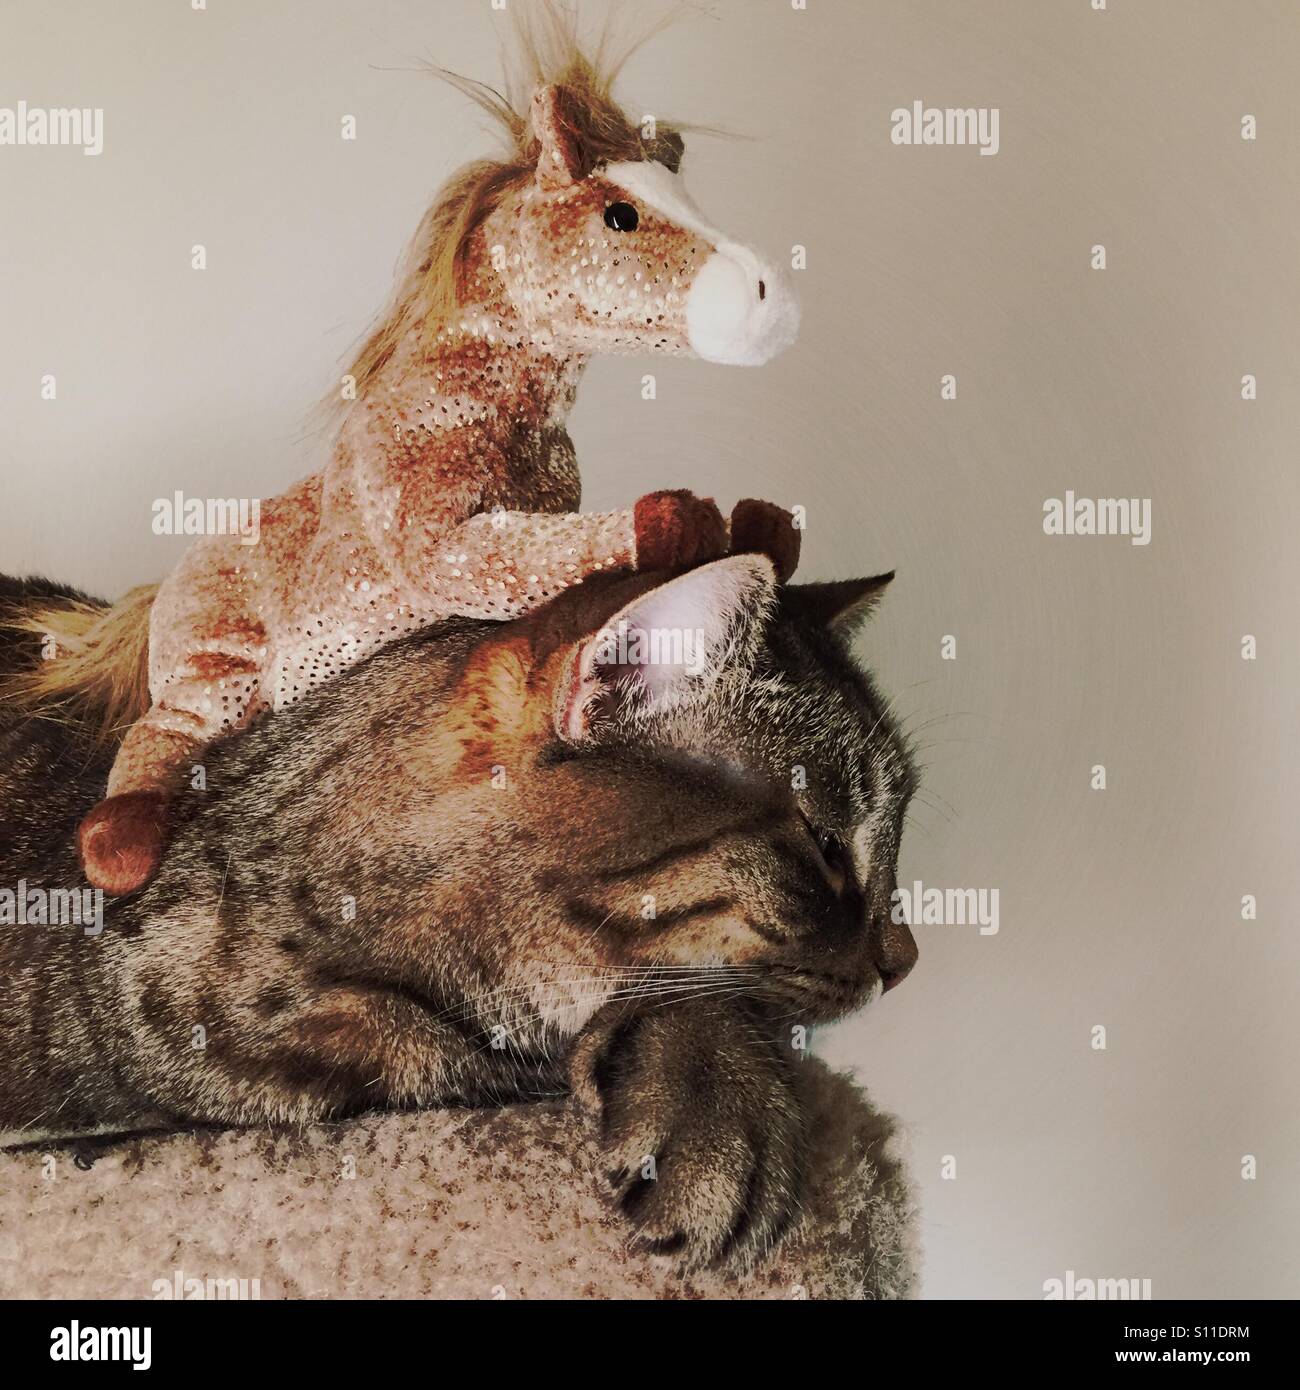 Toy horse on tabby cat Stock Photo